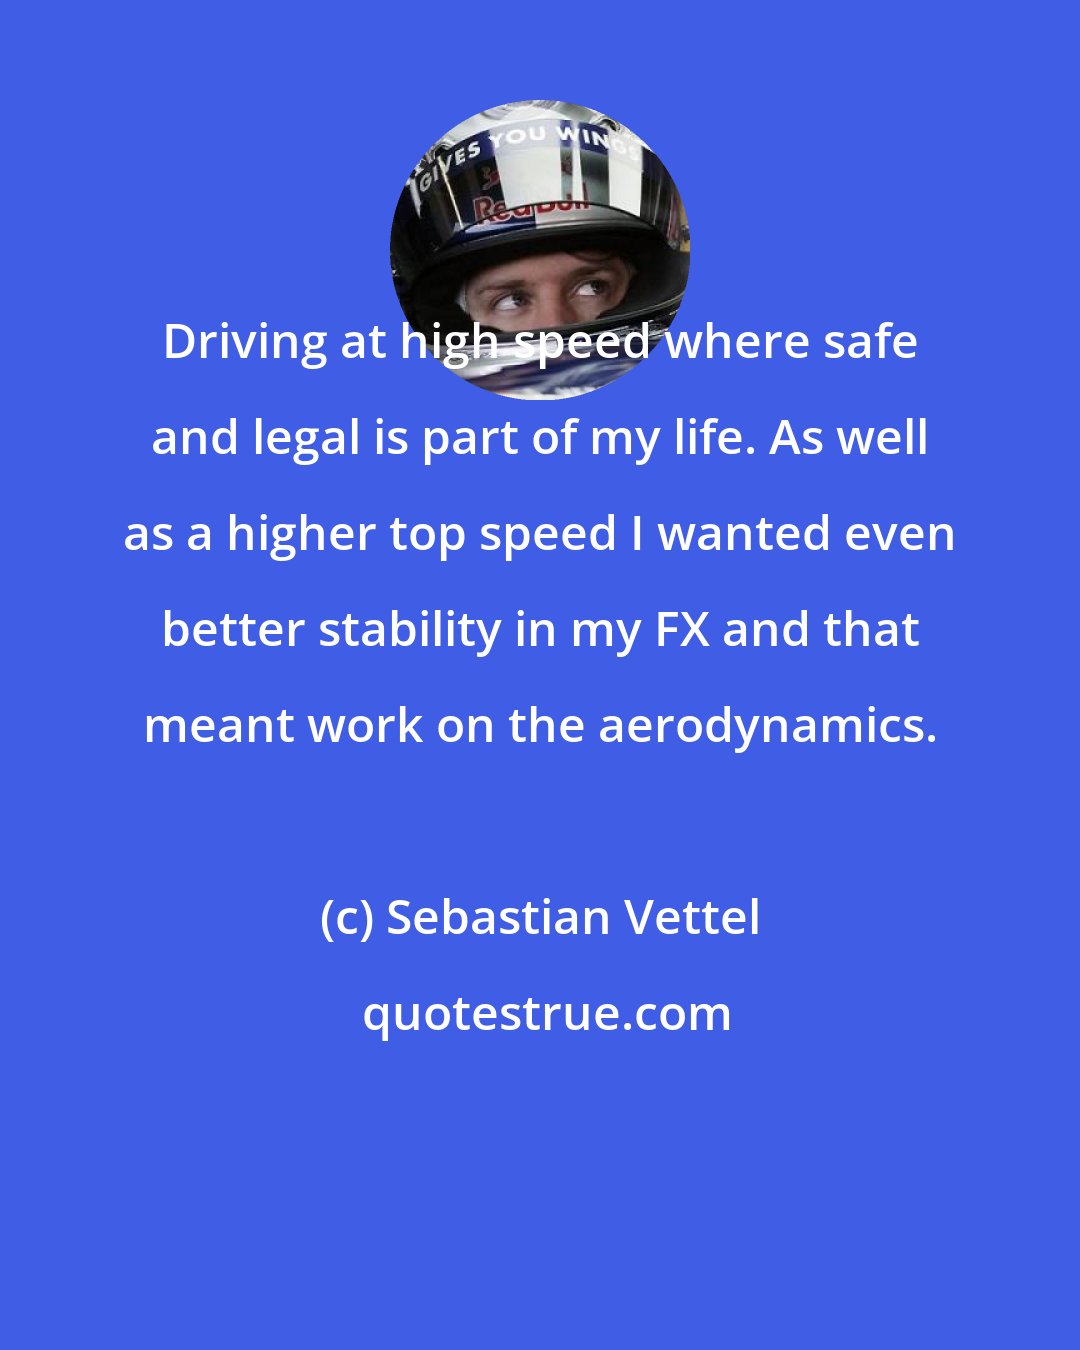 Sebastian Vettel: Driving at high speed where safe and legal is part of my life. As well as a higher top speed I wanted even better stability in my FX and that meant work on the aerodynamics.